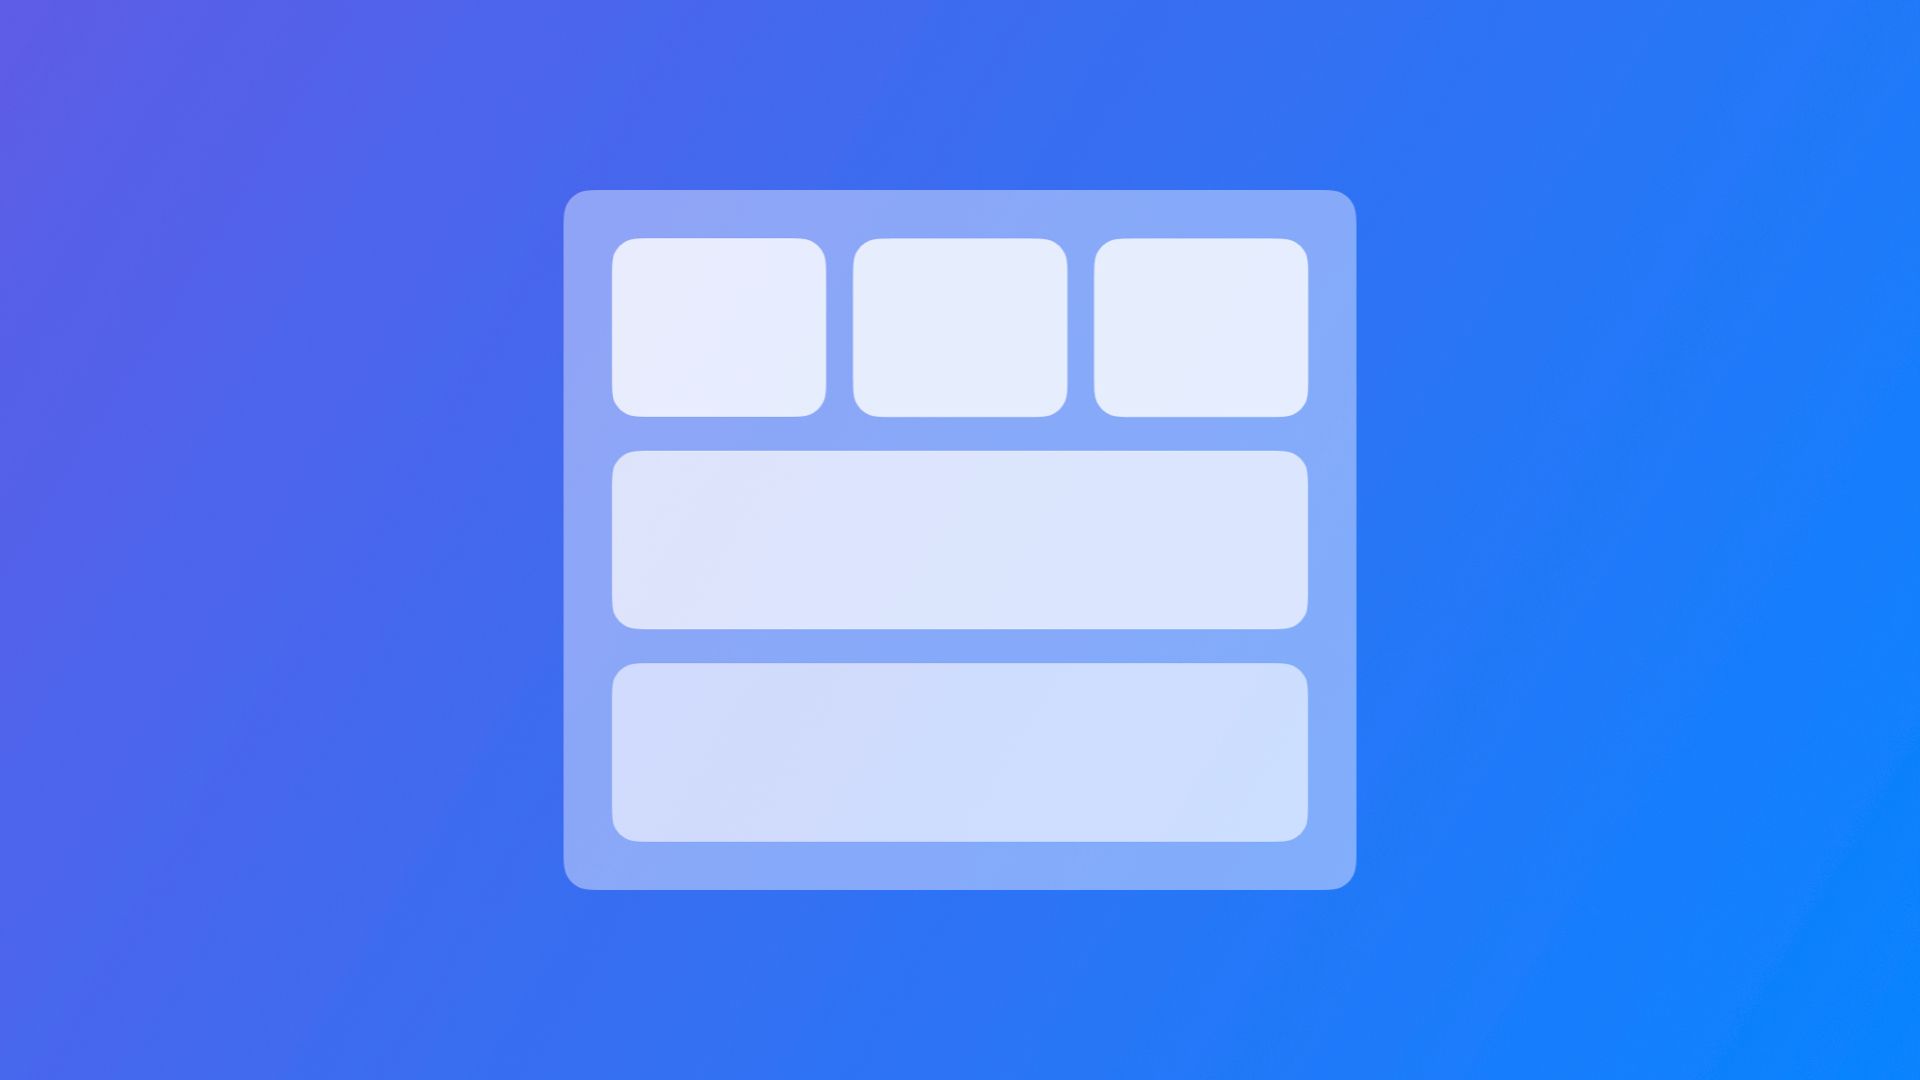 GroupBox View in SwiftUI 3